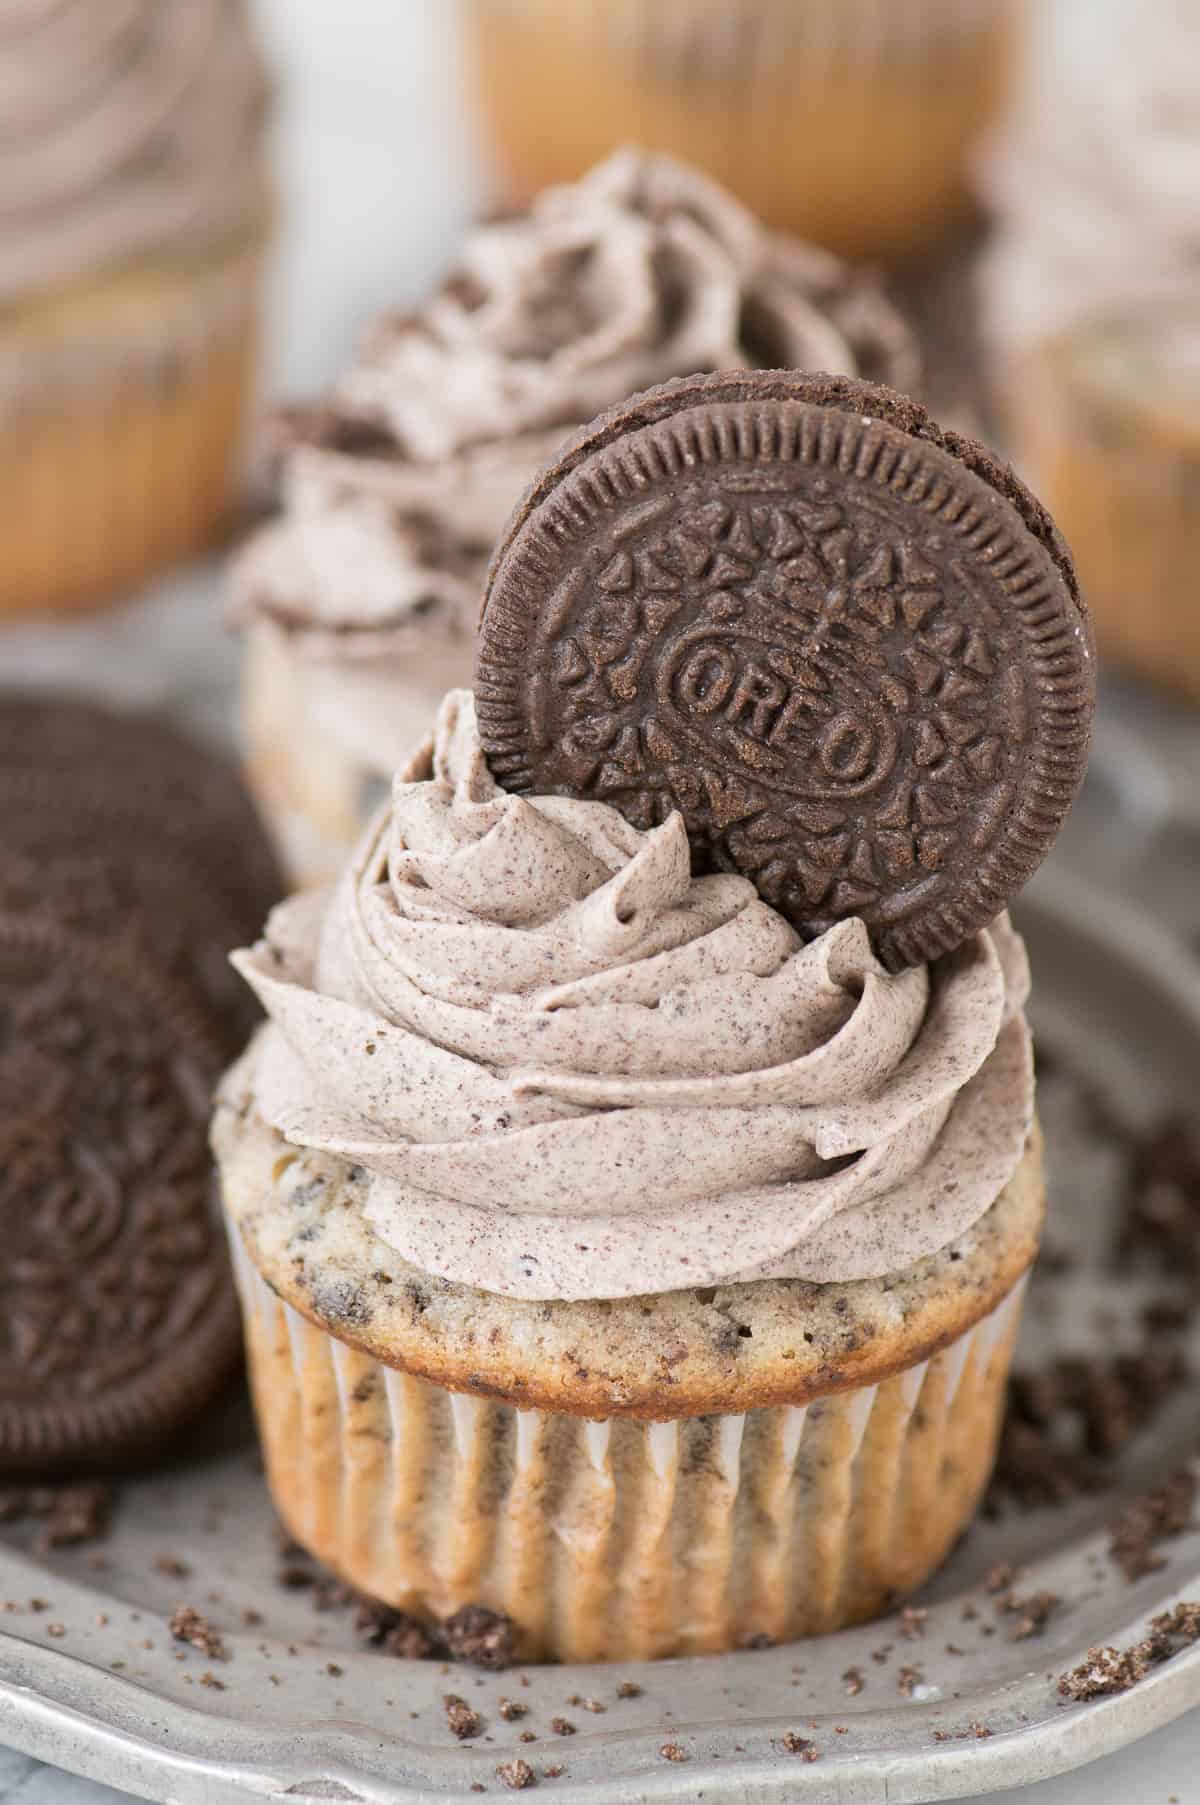 Cupcake topped with Oreo frosting and Oreo cookie